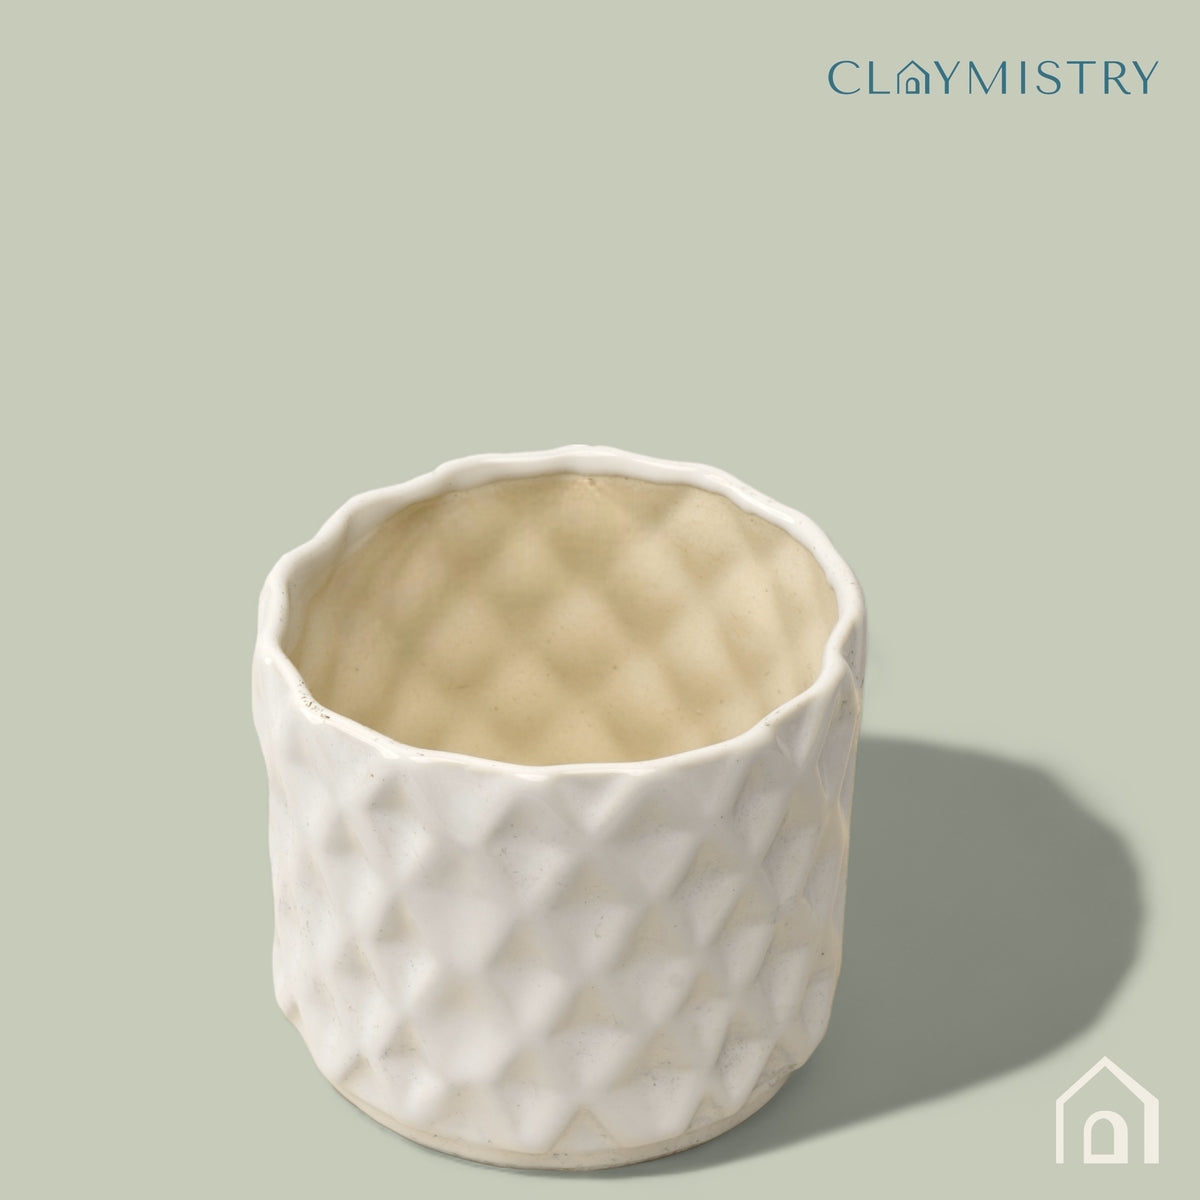 Claymistry Small Ceramic White textured Design Pot for Indoor Plants, Set of 1 | 13cm * 13cm * 11cm | Glossy | Home, Indoor Decor & Gifting | Planters for Garden, Balcony, Living Room Decoration